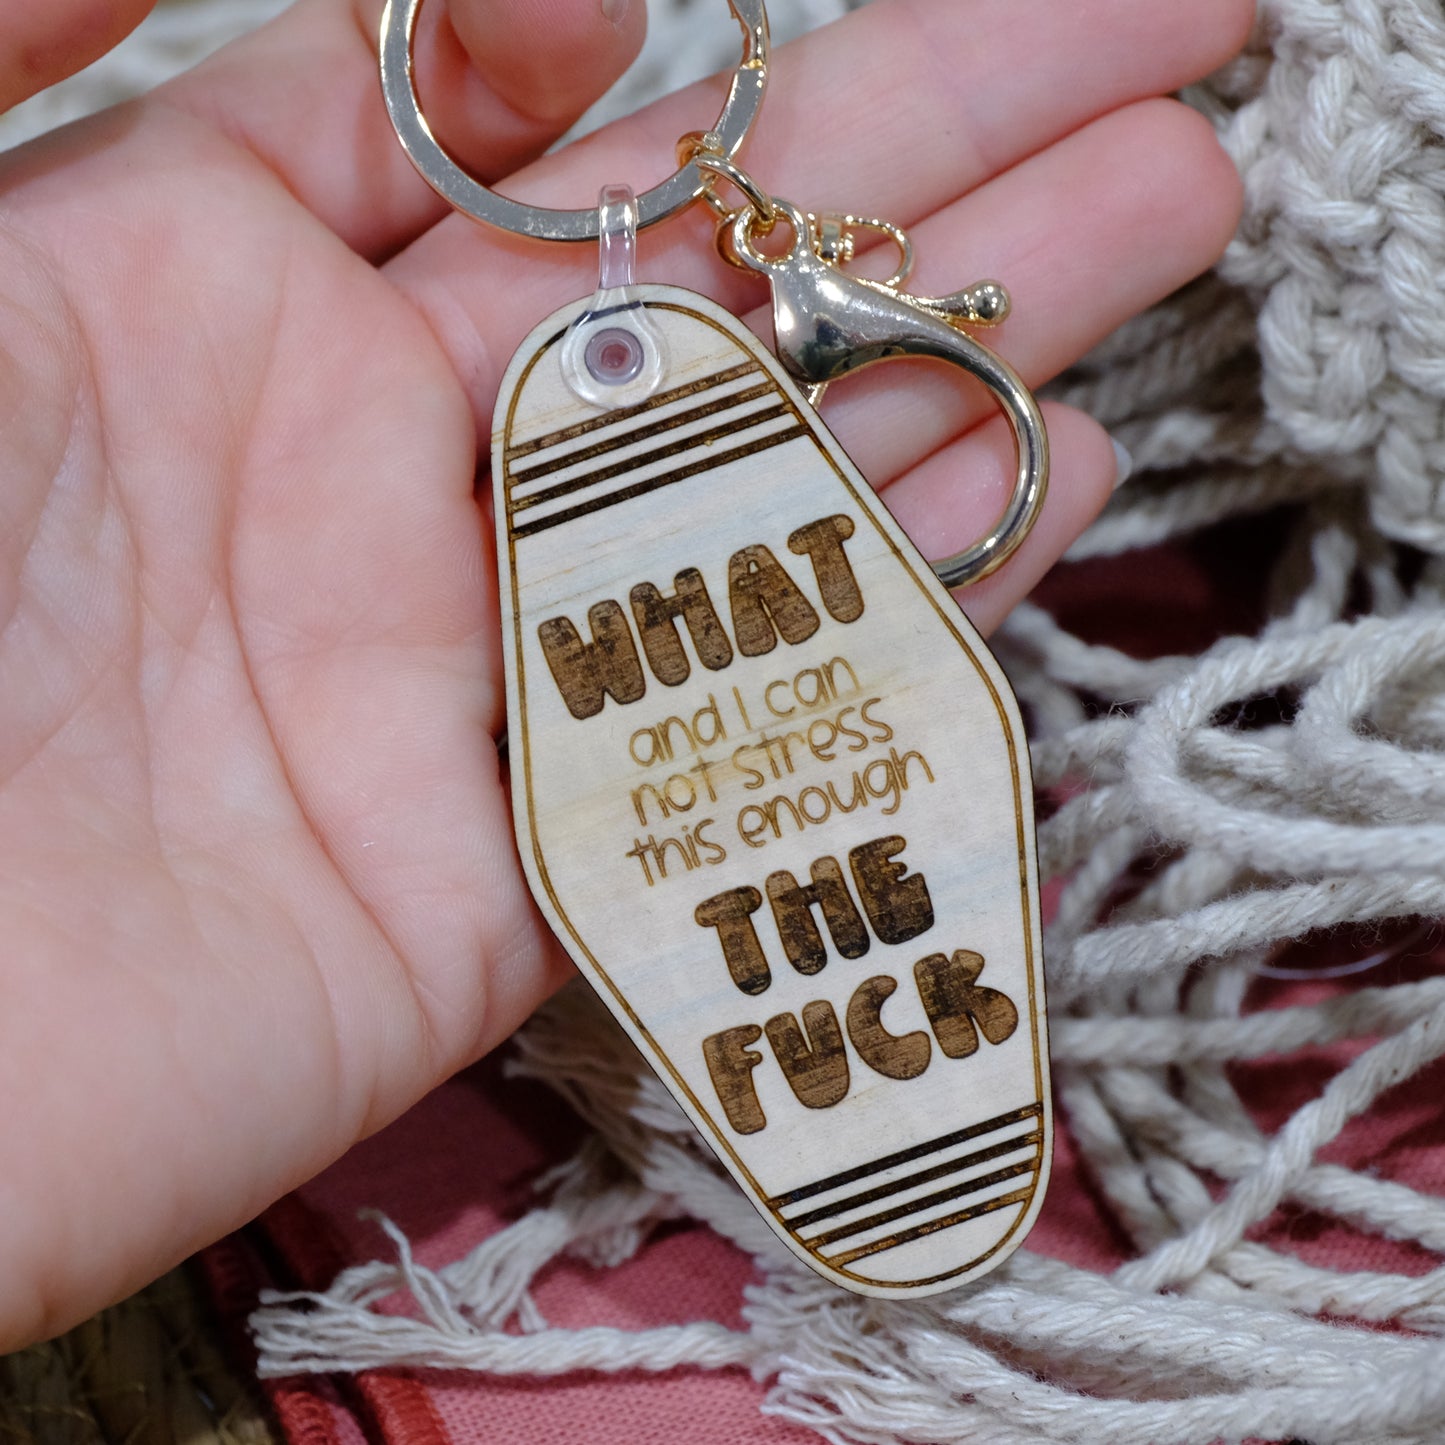 Keyring - What, and I can not stress this enough, the fuck